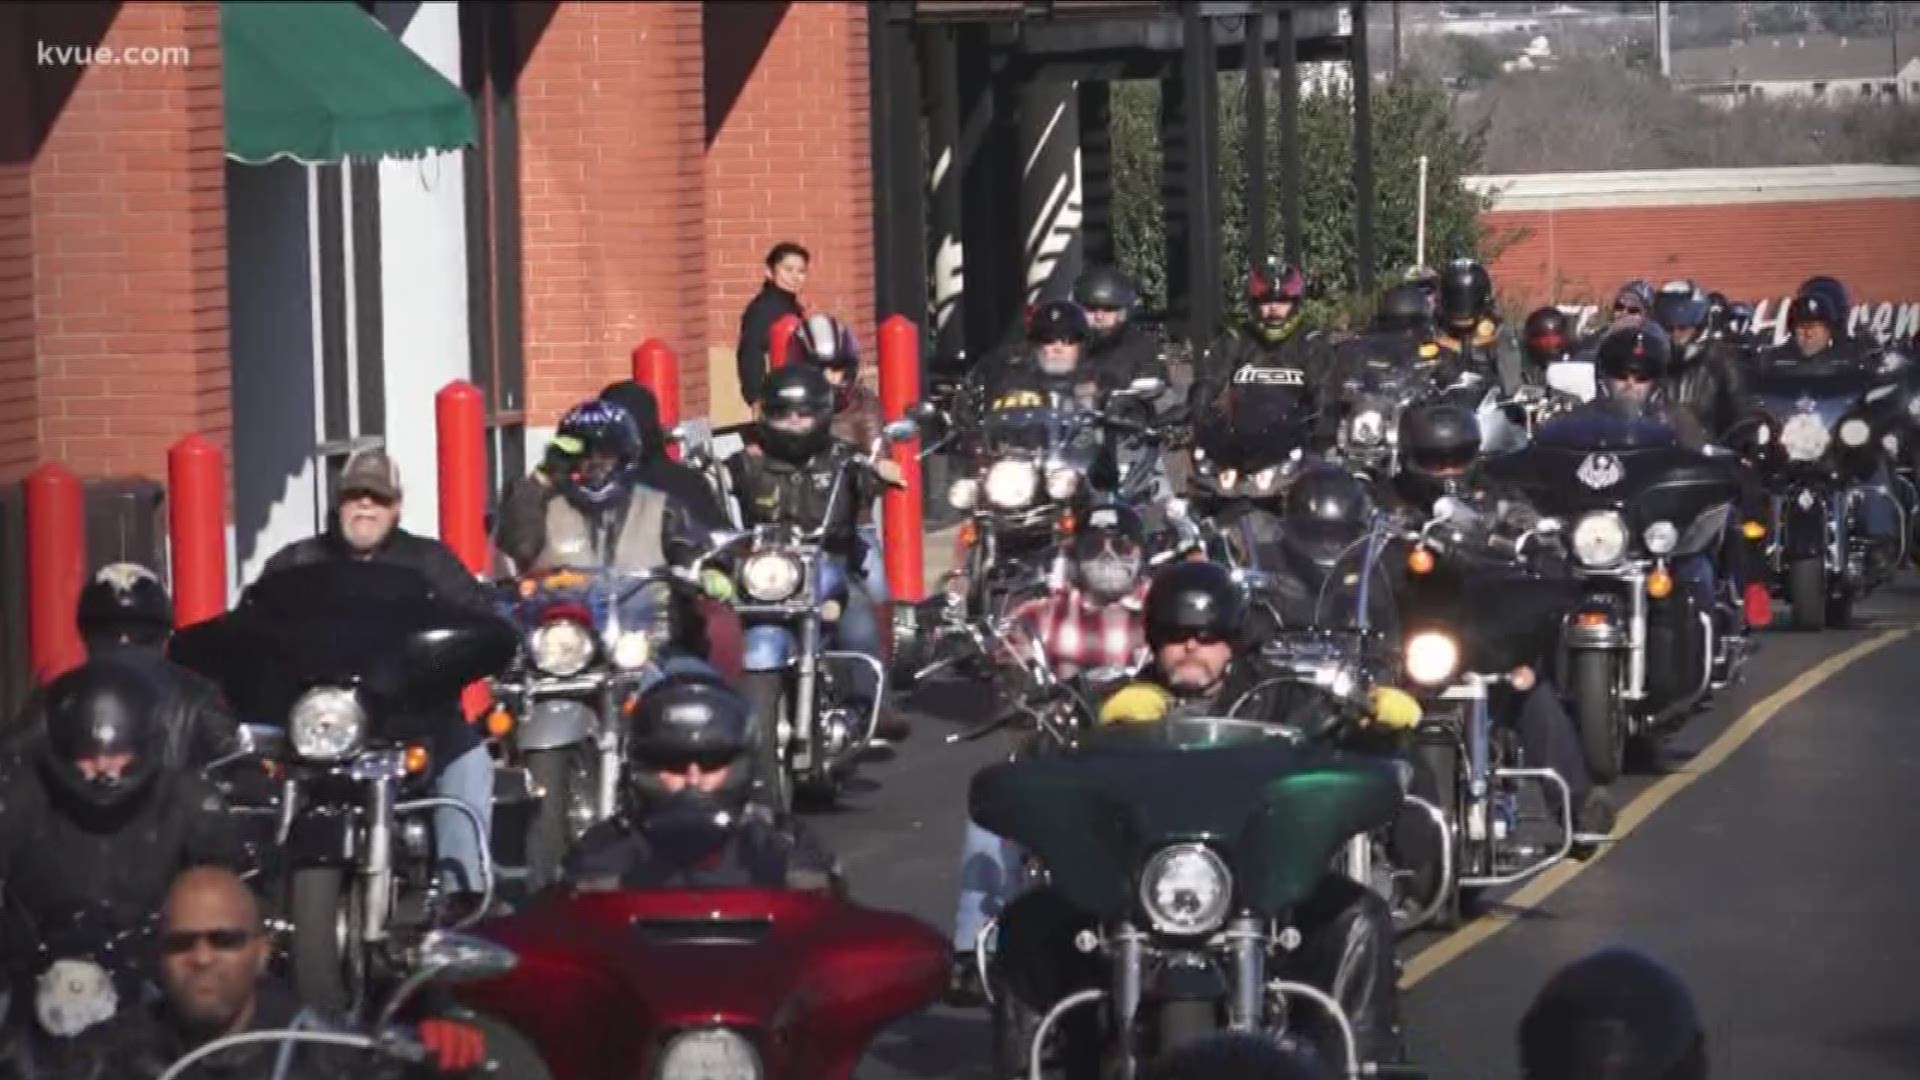 More than 1,000 bikers rode to honor Richard Overton on Saturday.